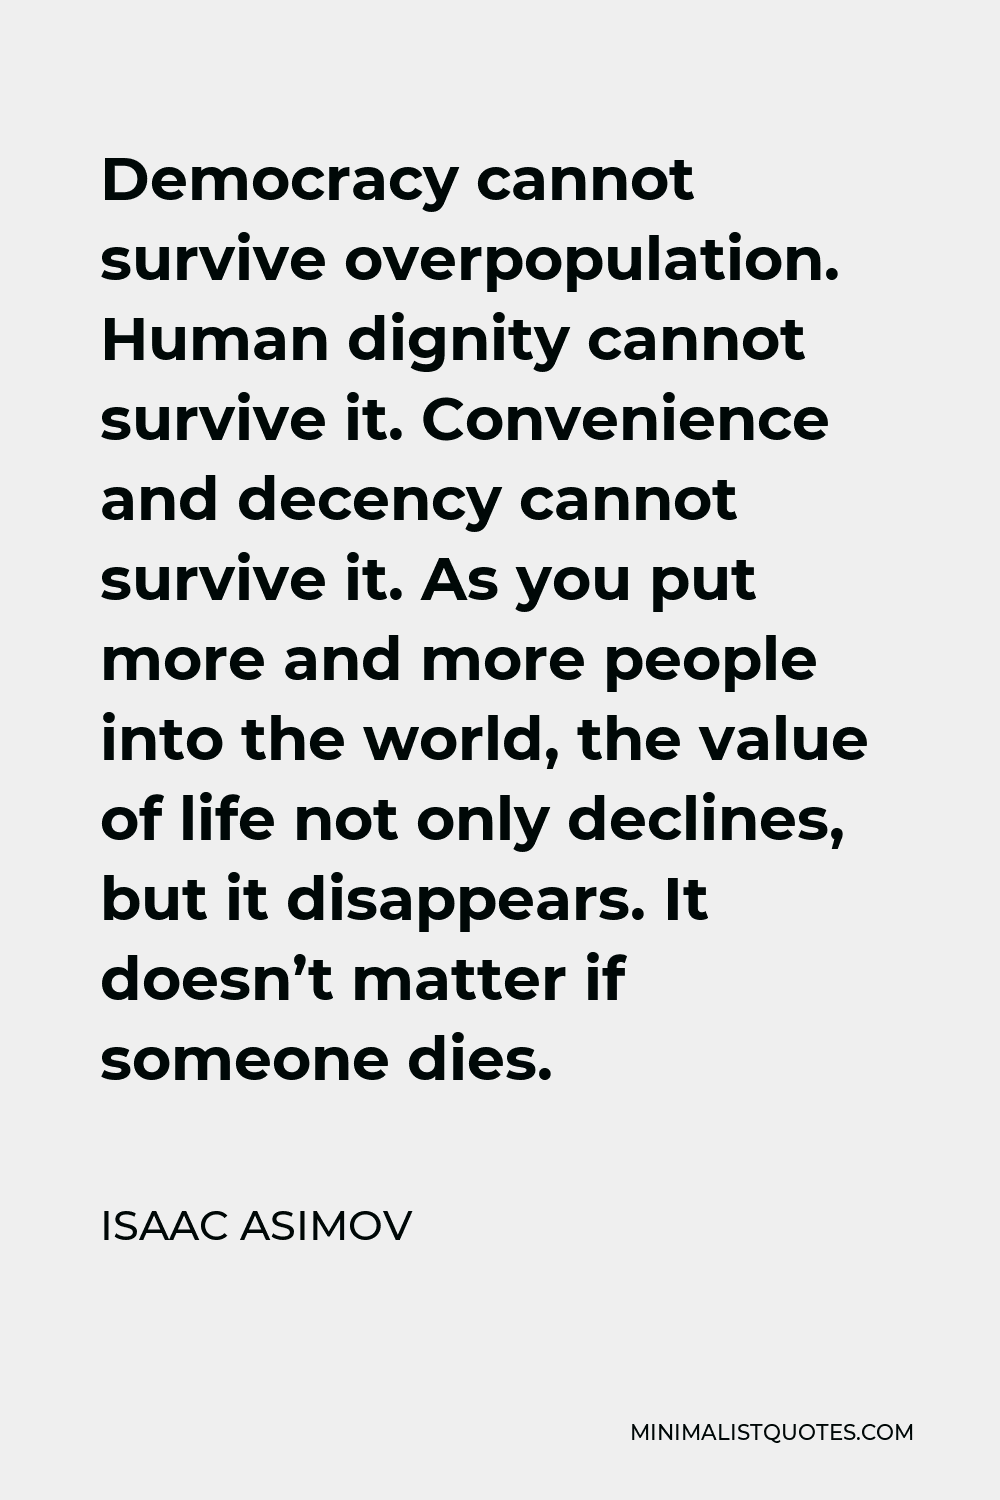 Isaac Asimov Quote - Democracy cannot survive overpopulation. Human dignity cannot survive it. Convenience and decency cannot survive it. As you put more and more people into the world, the value of life not only declines, but it disappears. It doesn’t matter if someone dies.